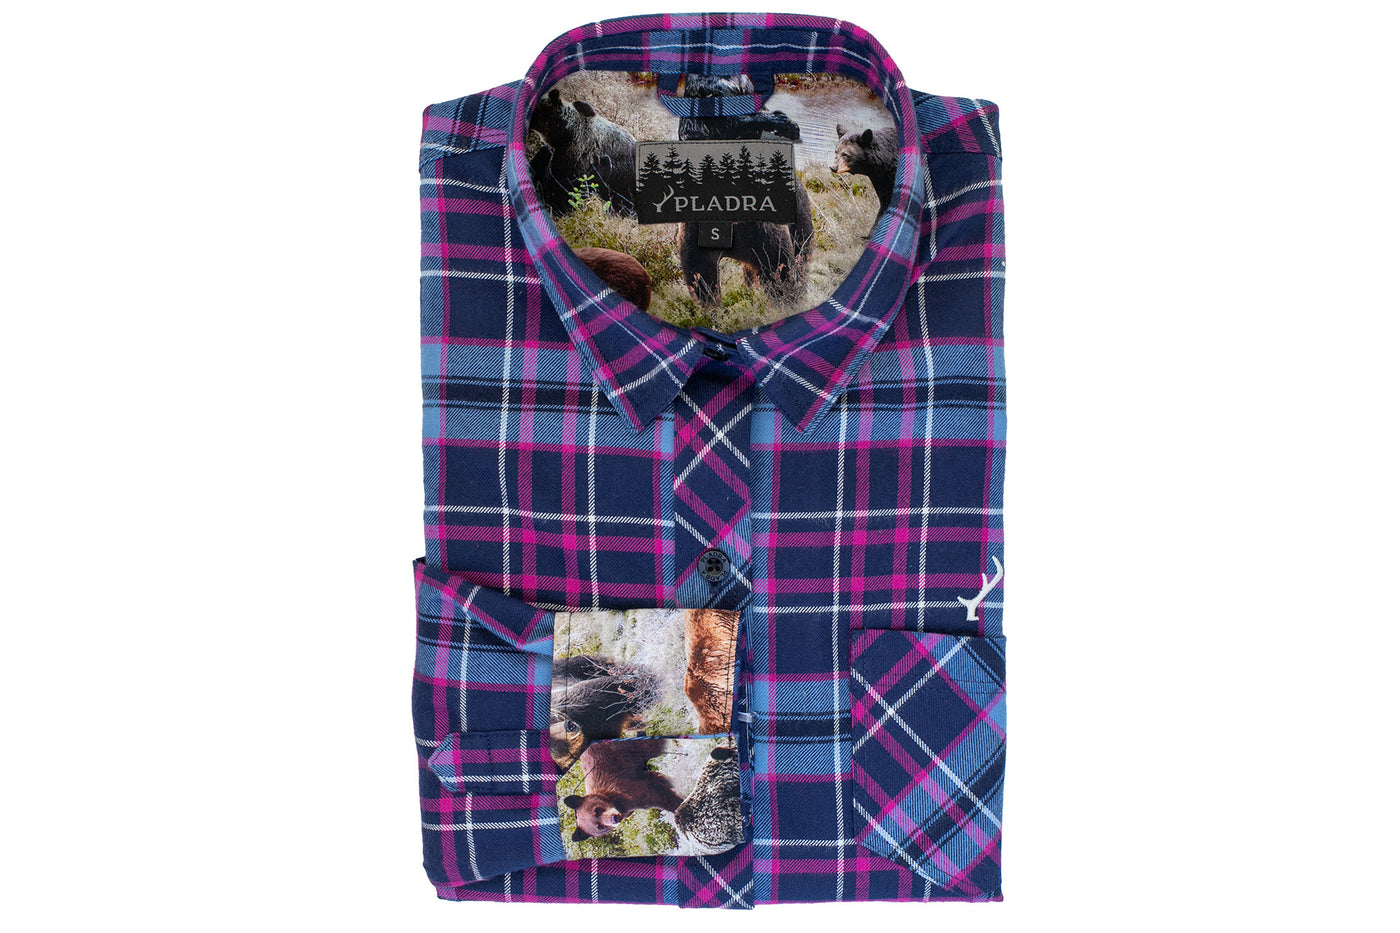 Women's Peregrine Every Day Flannel Shirt- Bandit Blue